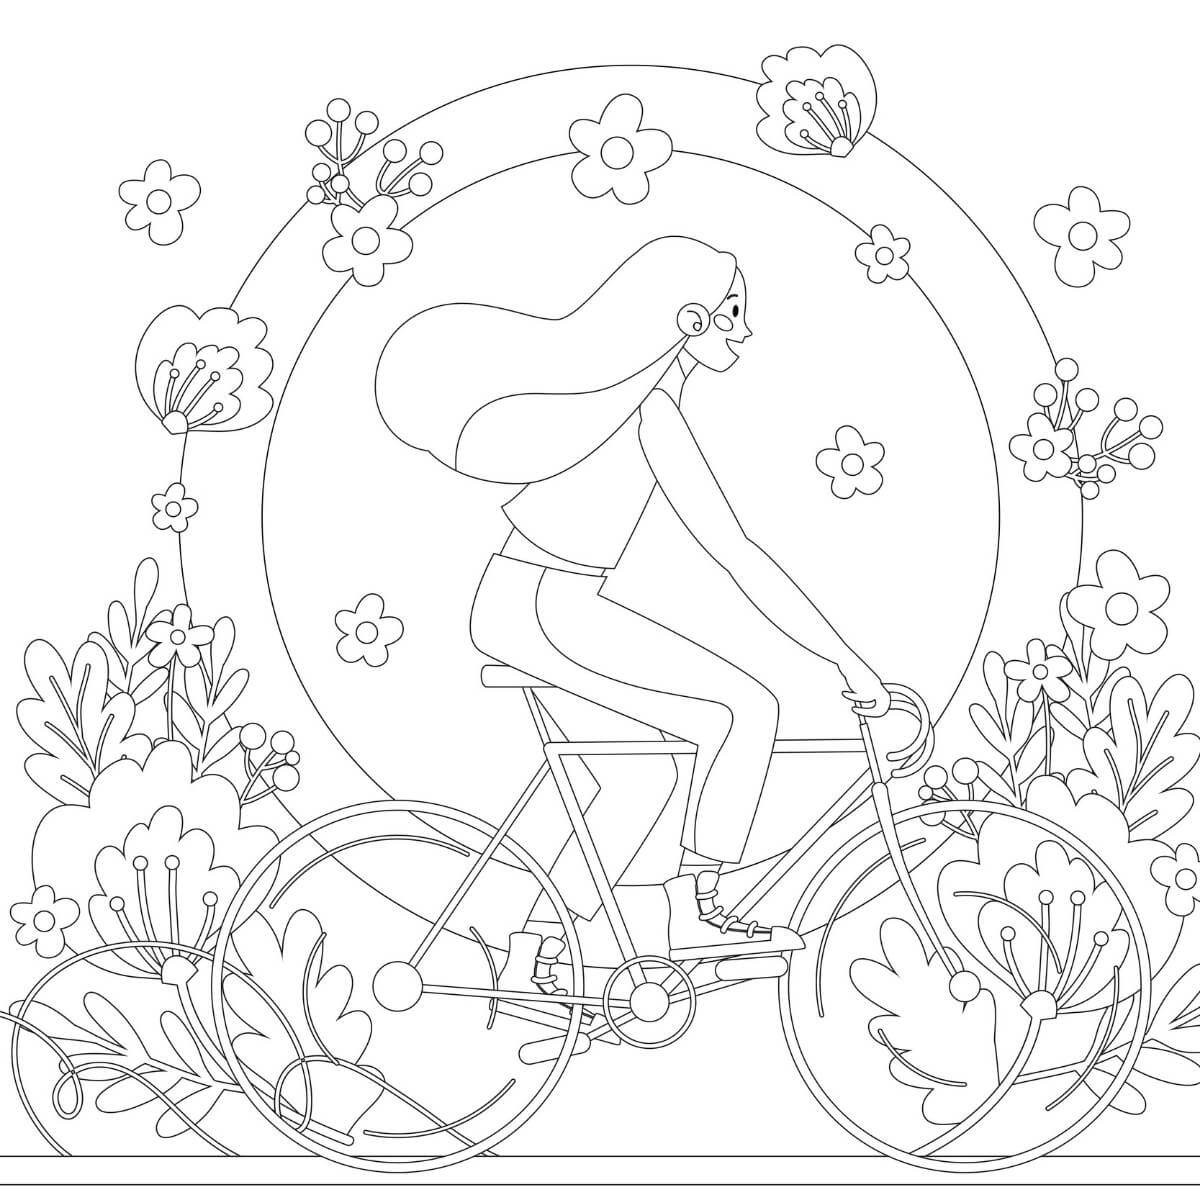 coloring pages for painting	pen coloring pages	paint coloring pages	painting coloring pages